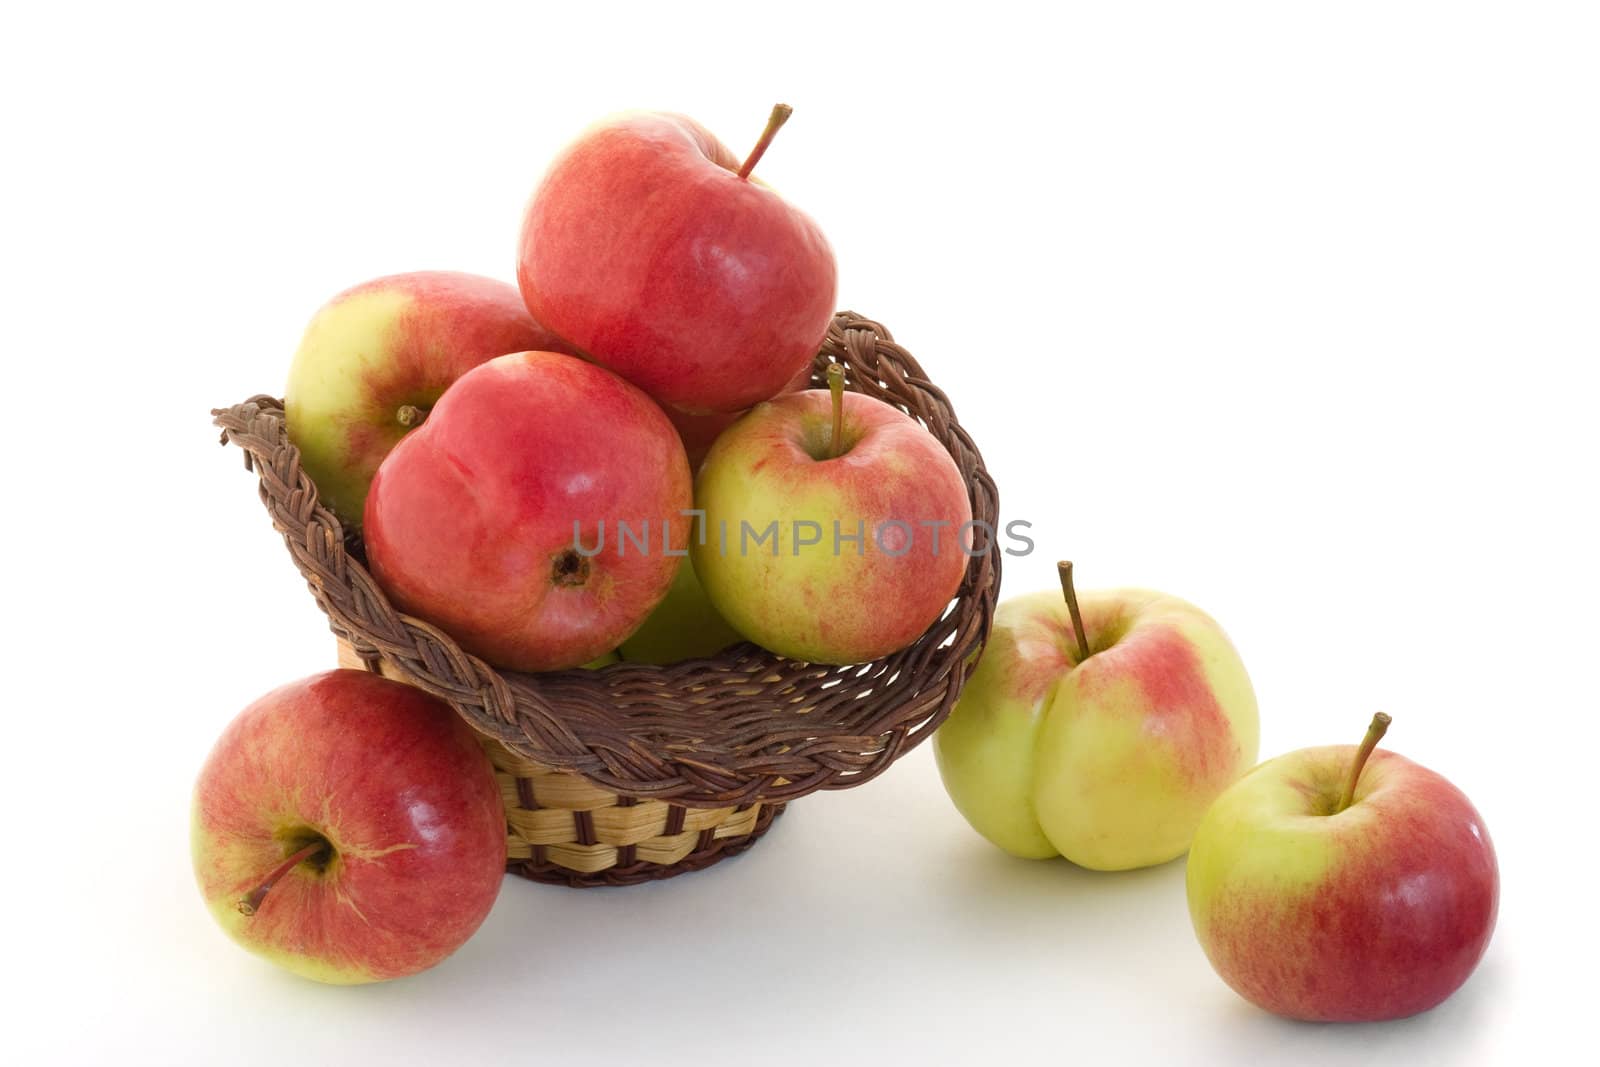 Ripe apples in a basket on a white background